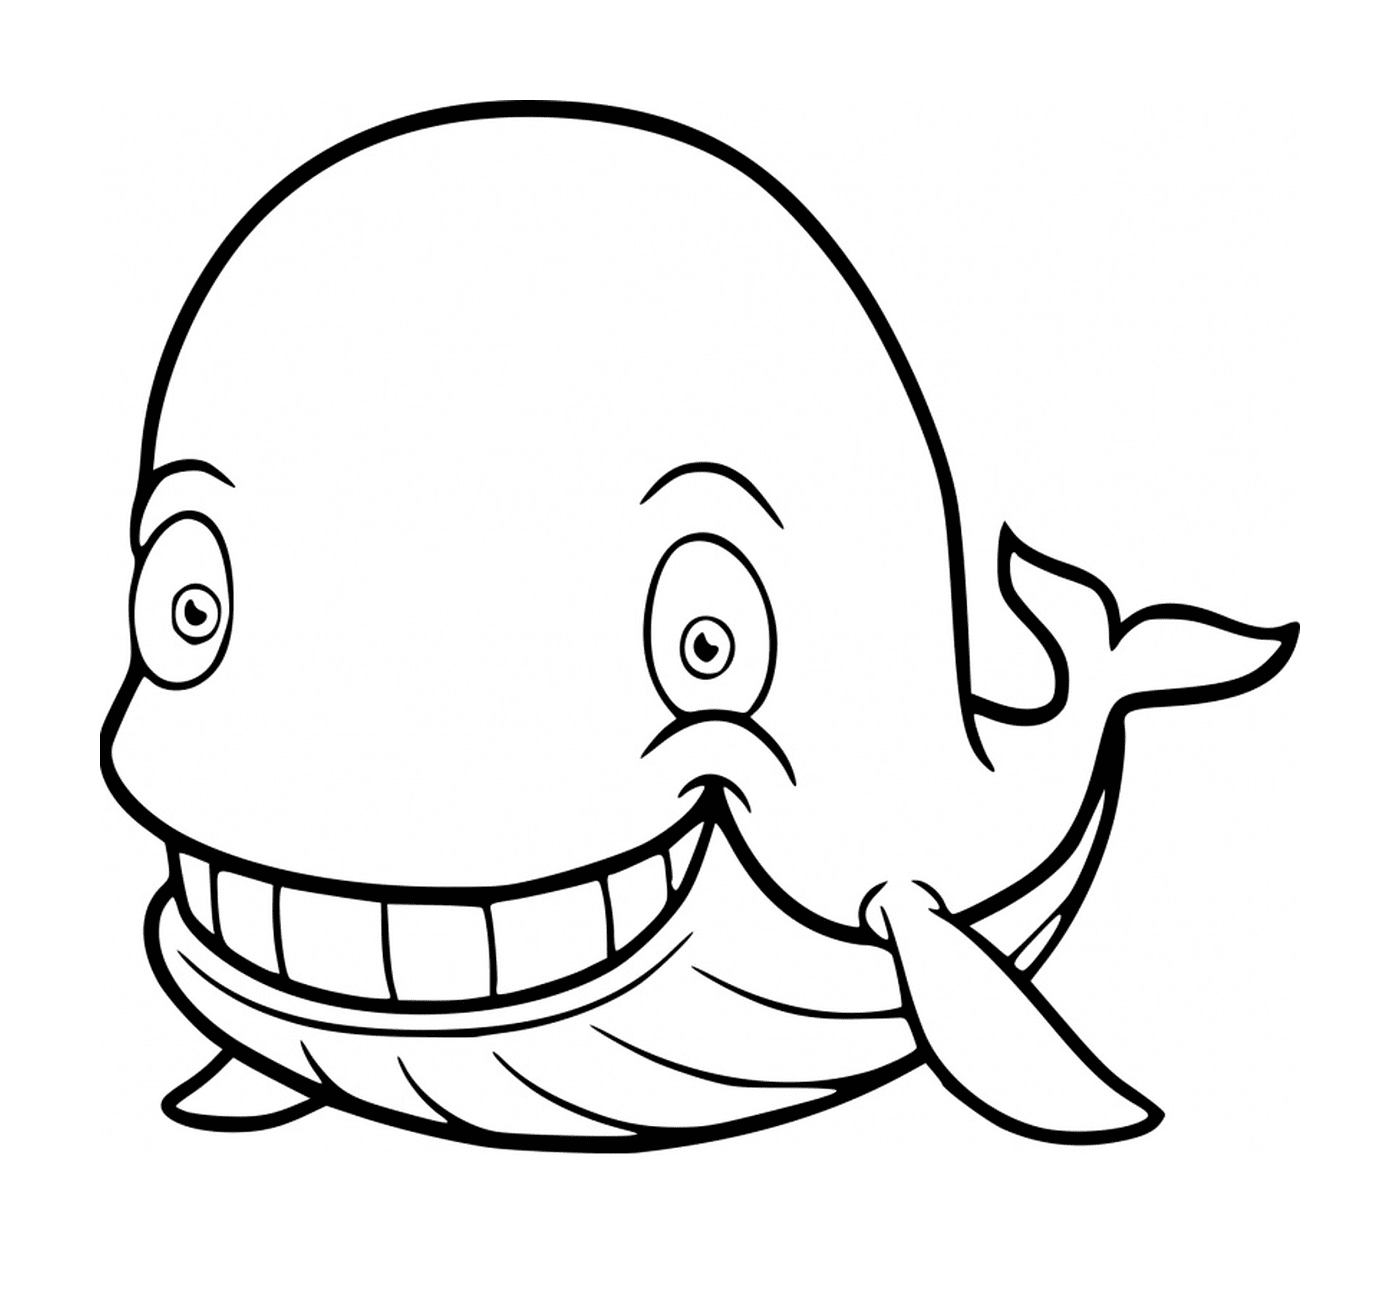  a smiling whale 